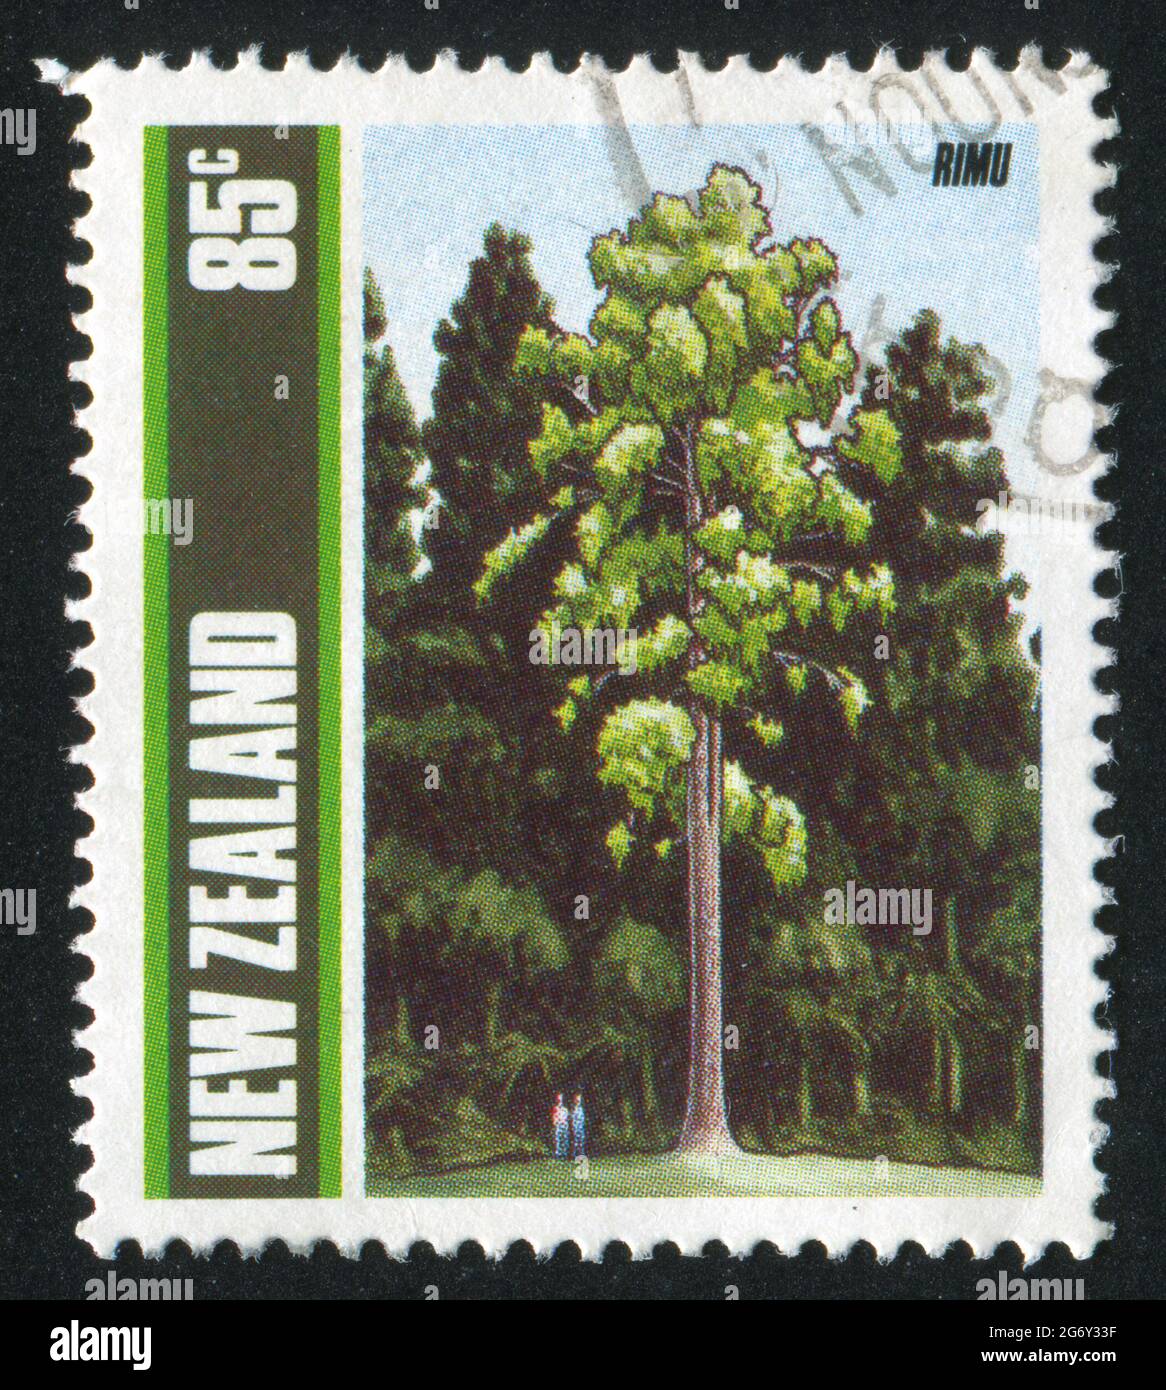 NEW ZEALAND - CIRCA 1989: stamp printed by New Zealand, shows Trees, Rimu, circa 1989 Stock Photo